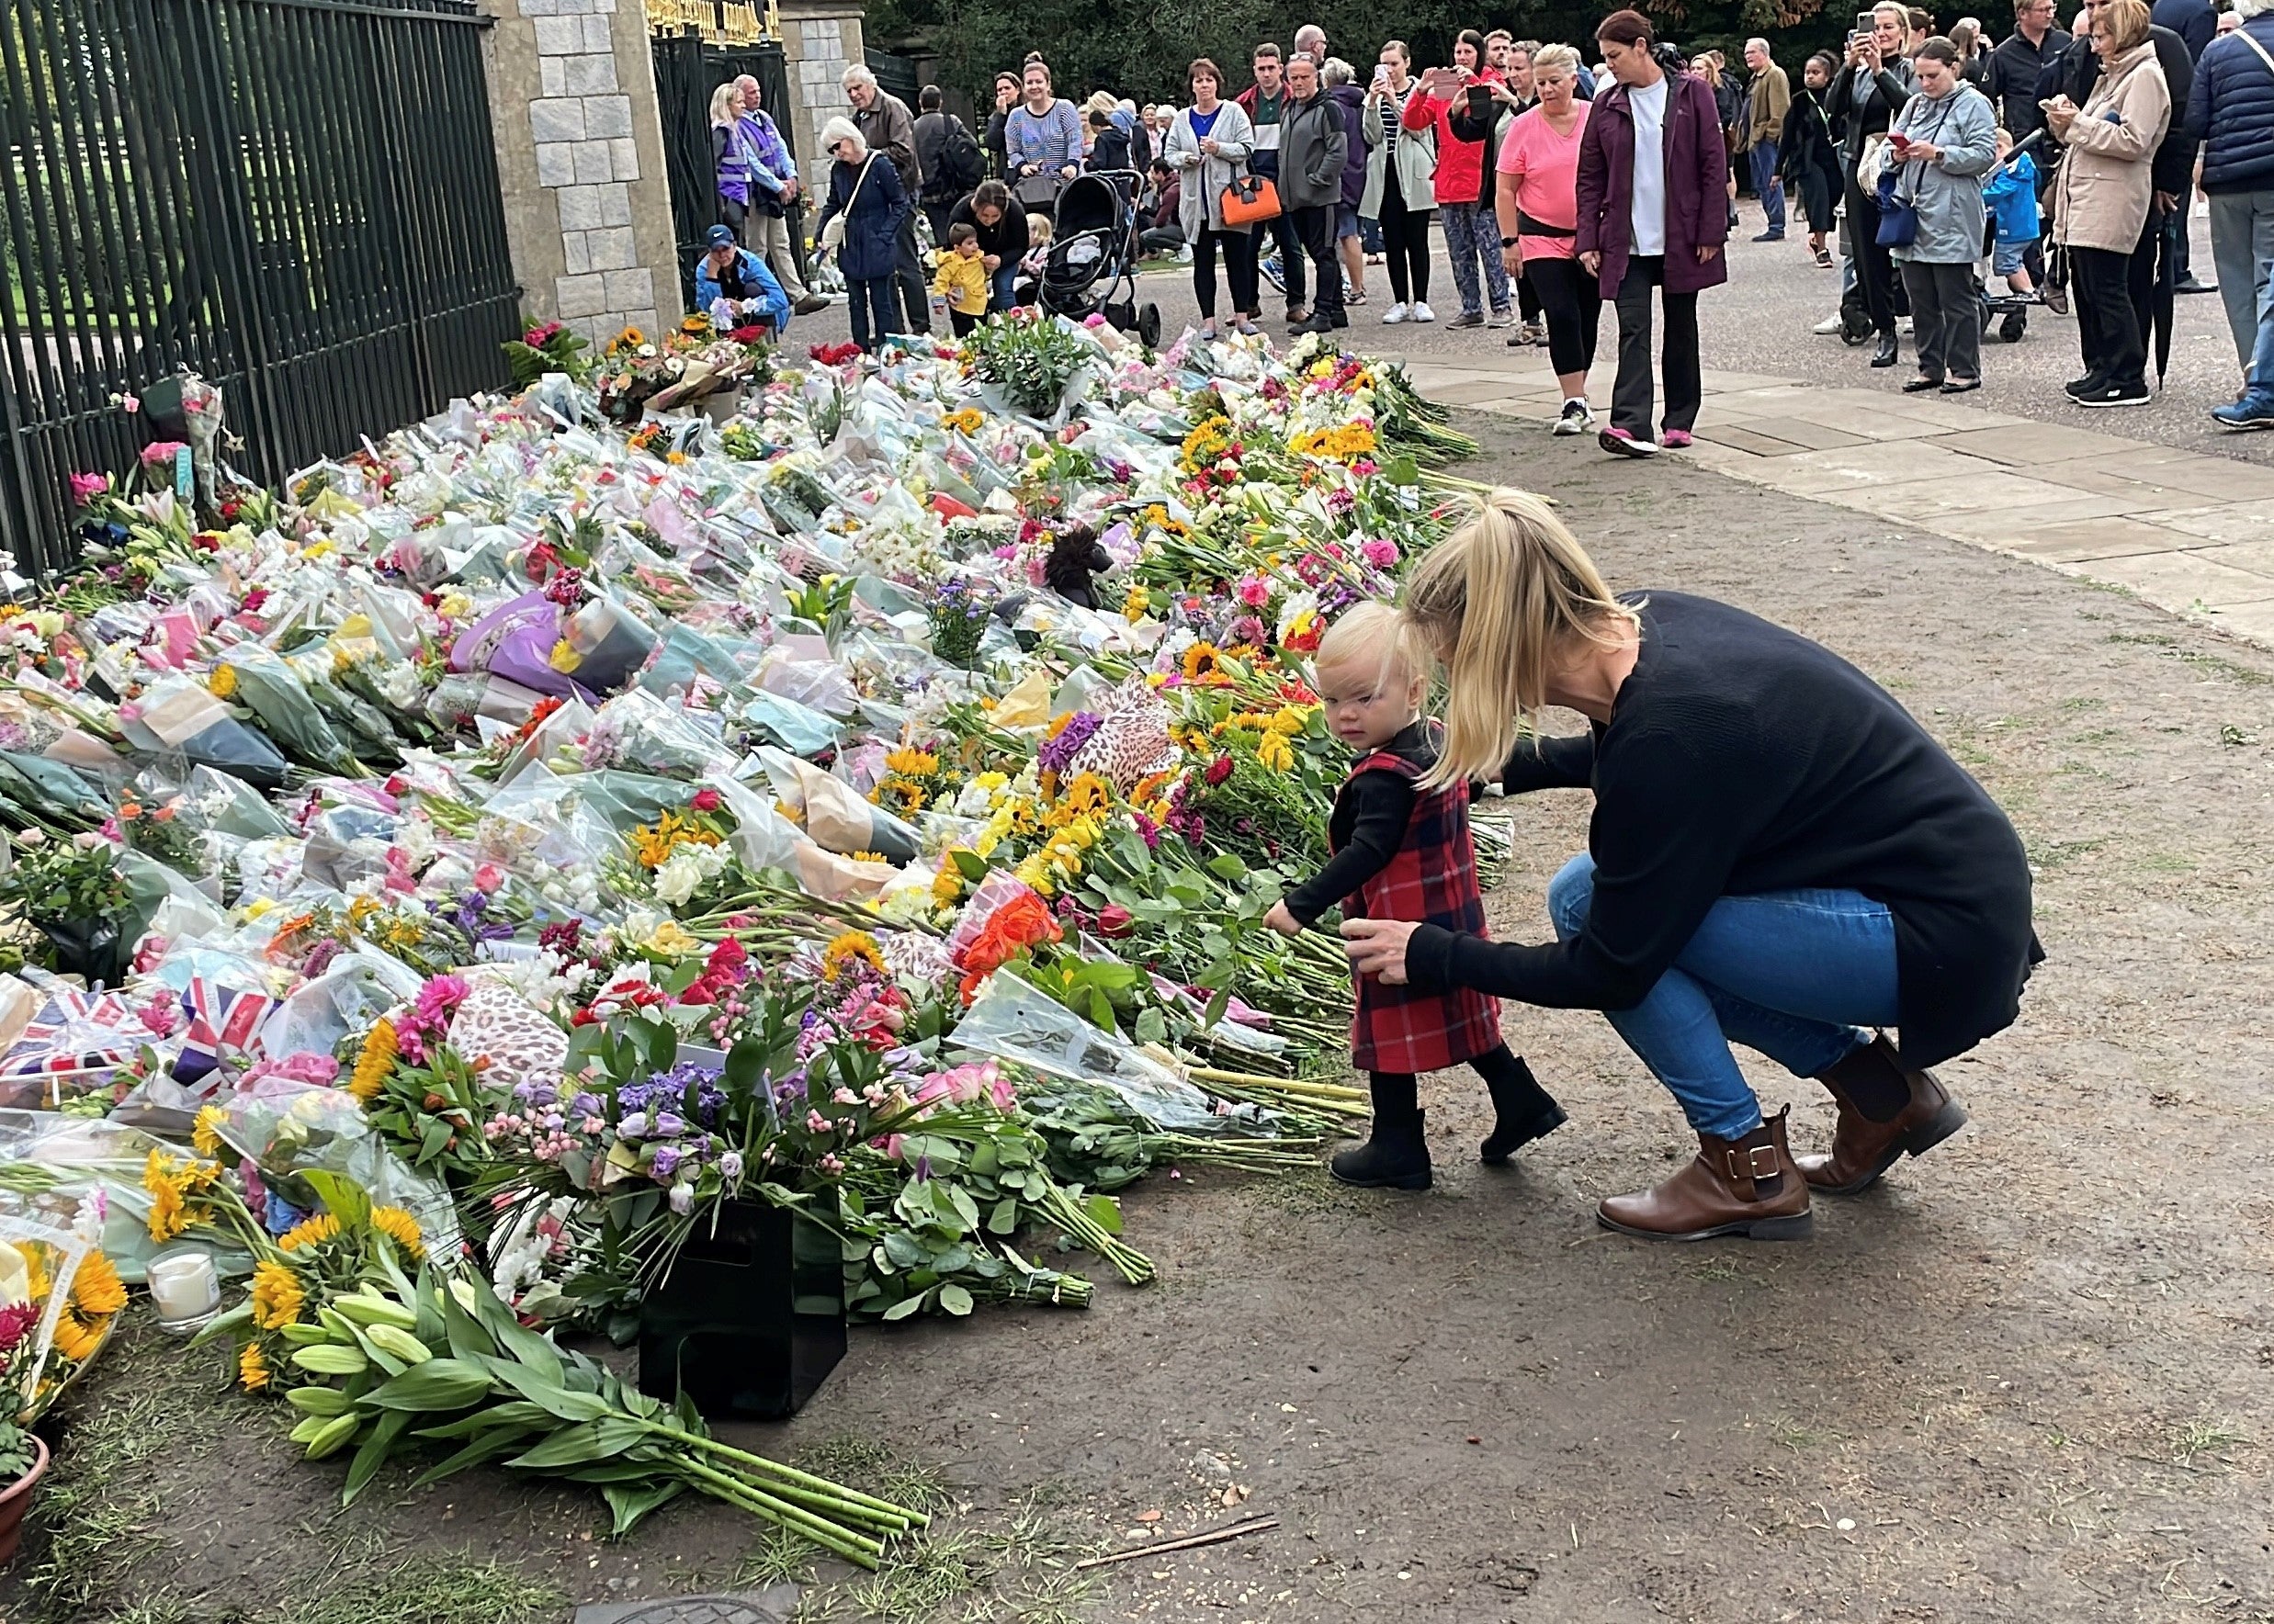 Amanda Bartlett with her daughter Ayla lay flowers at Cambridge Gate, Long Walk, Windsor (Ben Mitchell/PA)